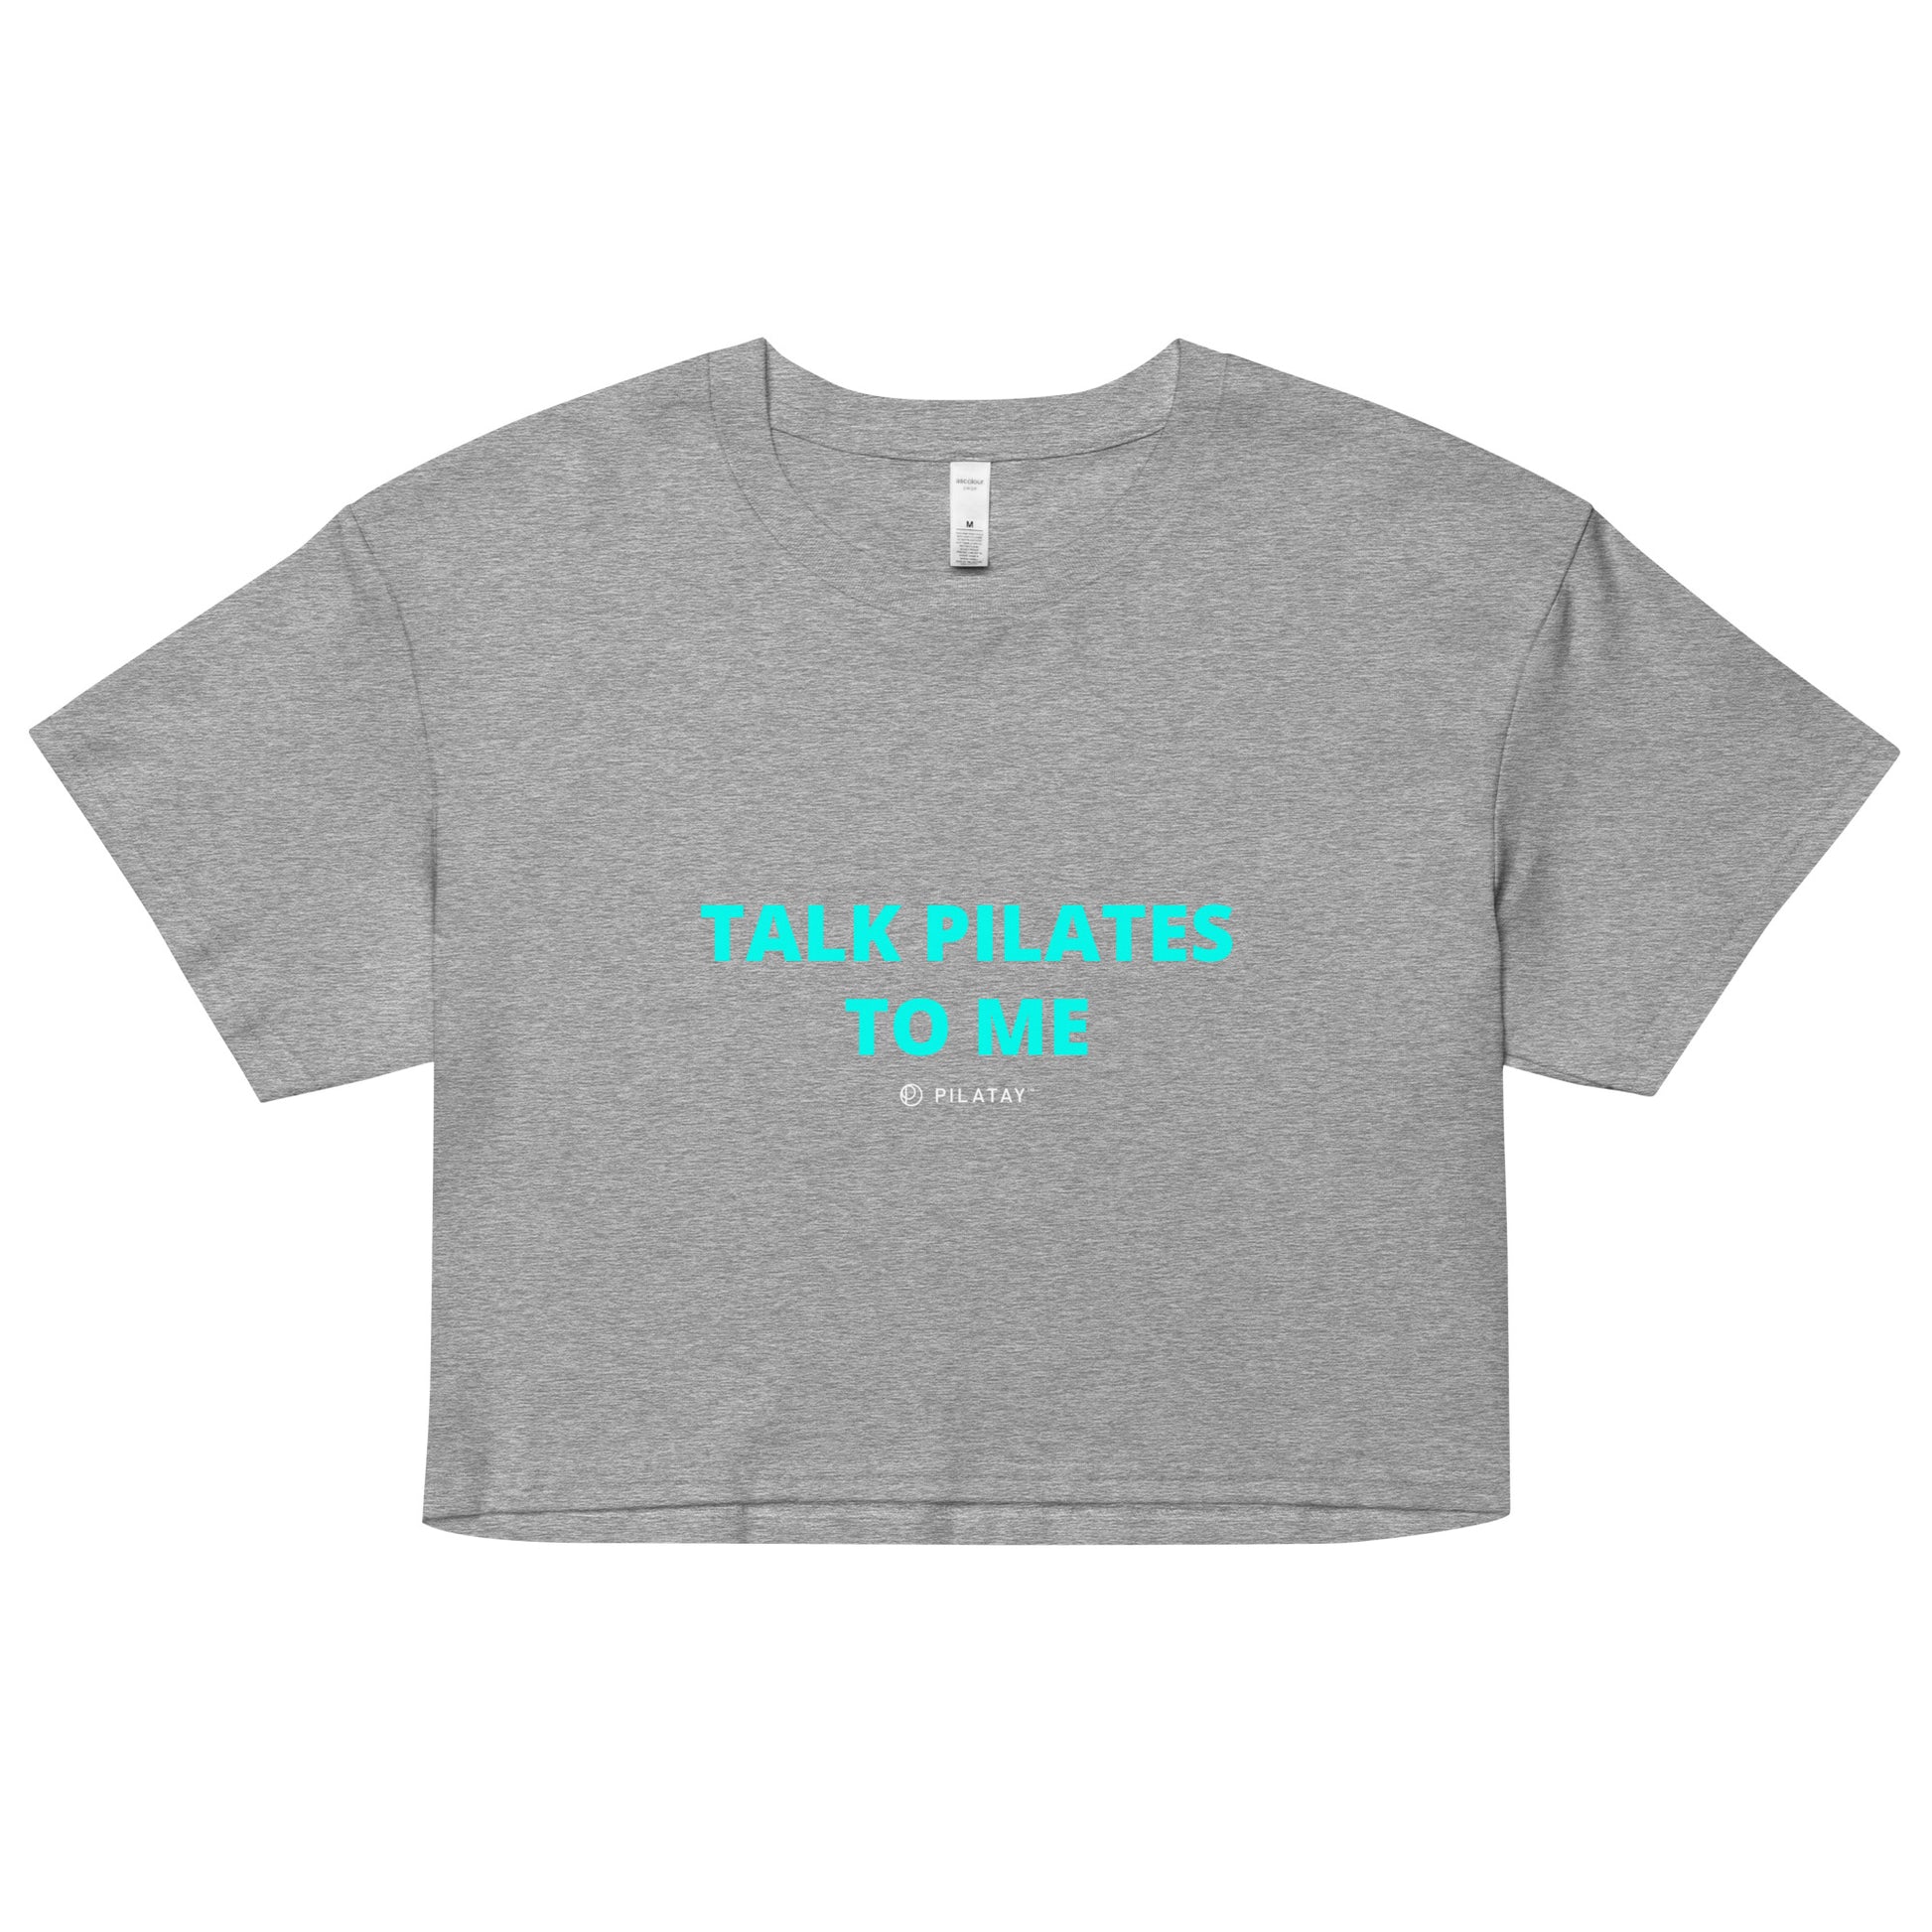 Talk Pilates To Me Crop Top by Pilatay